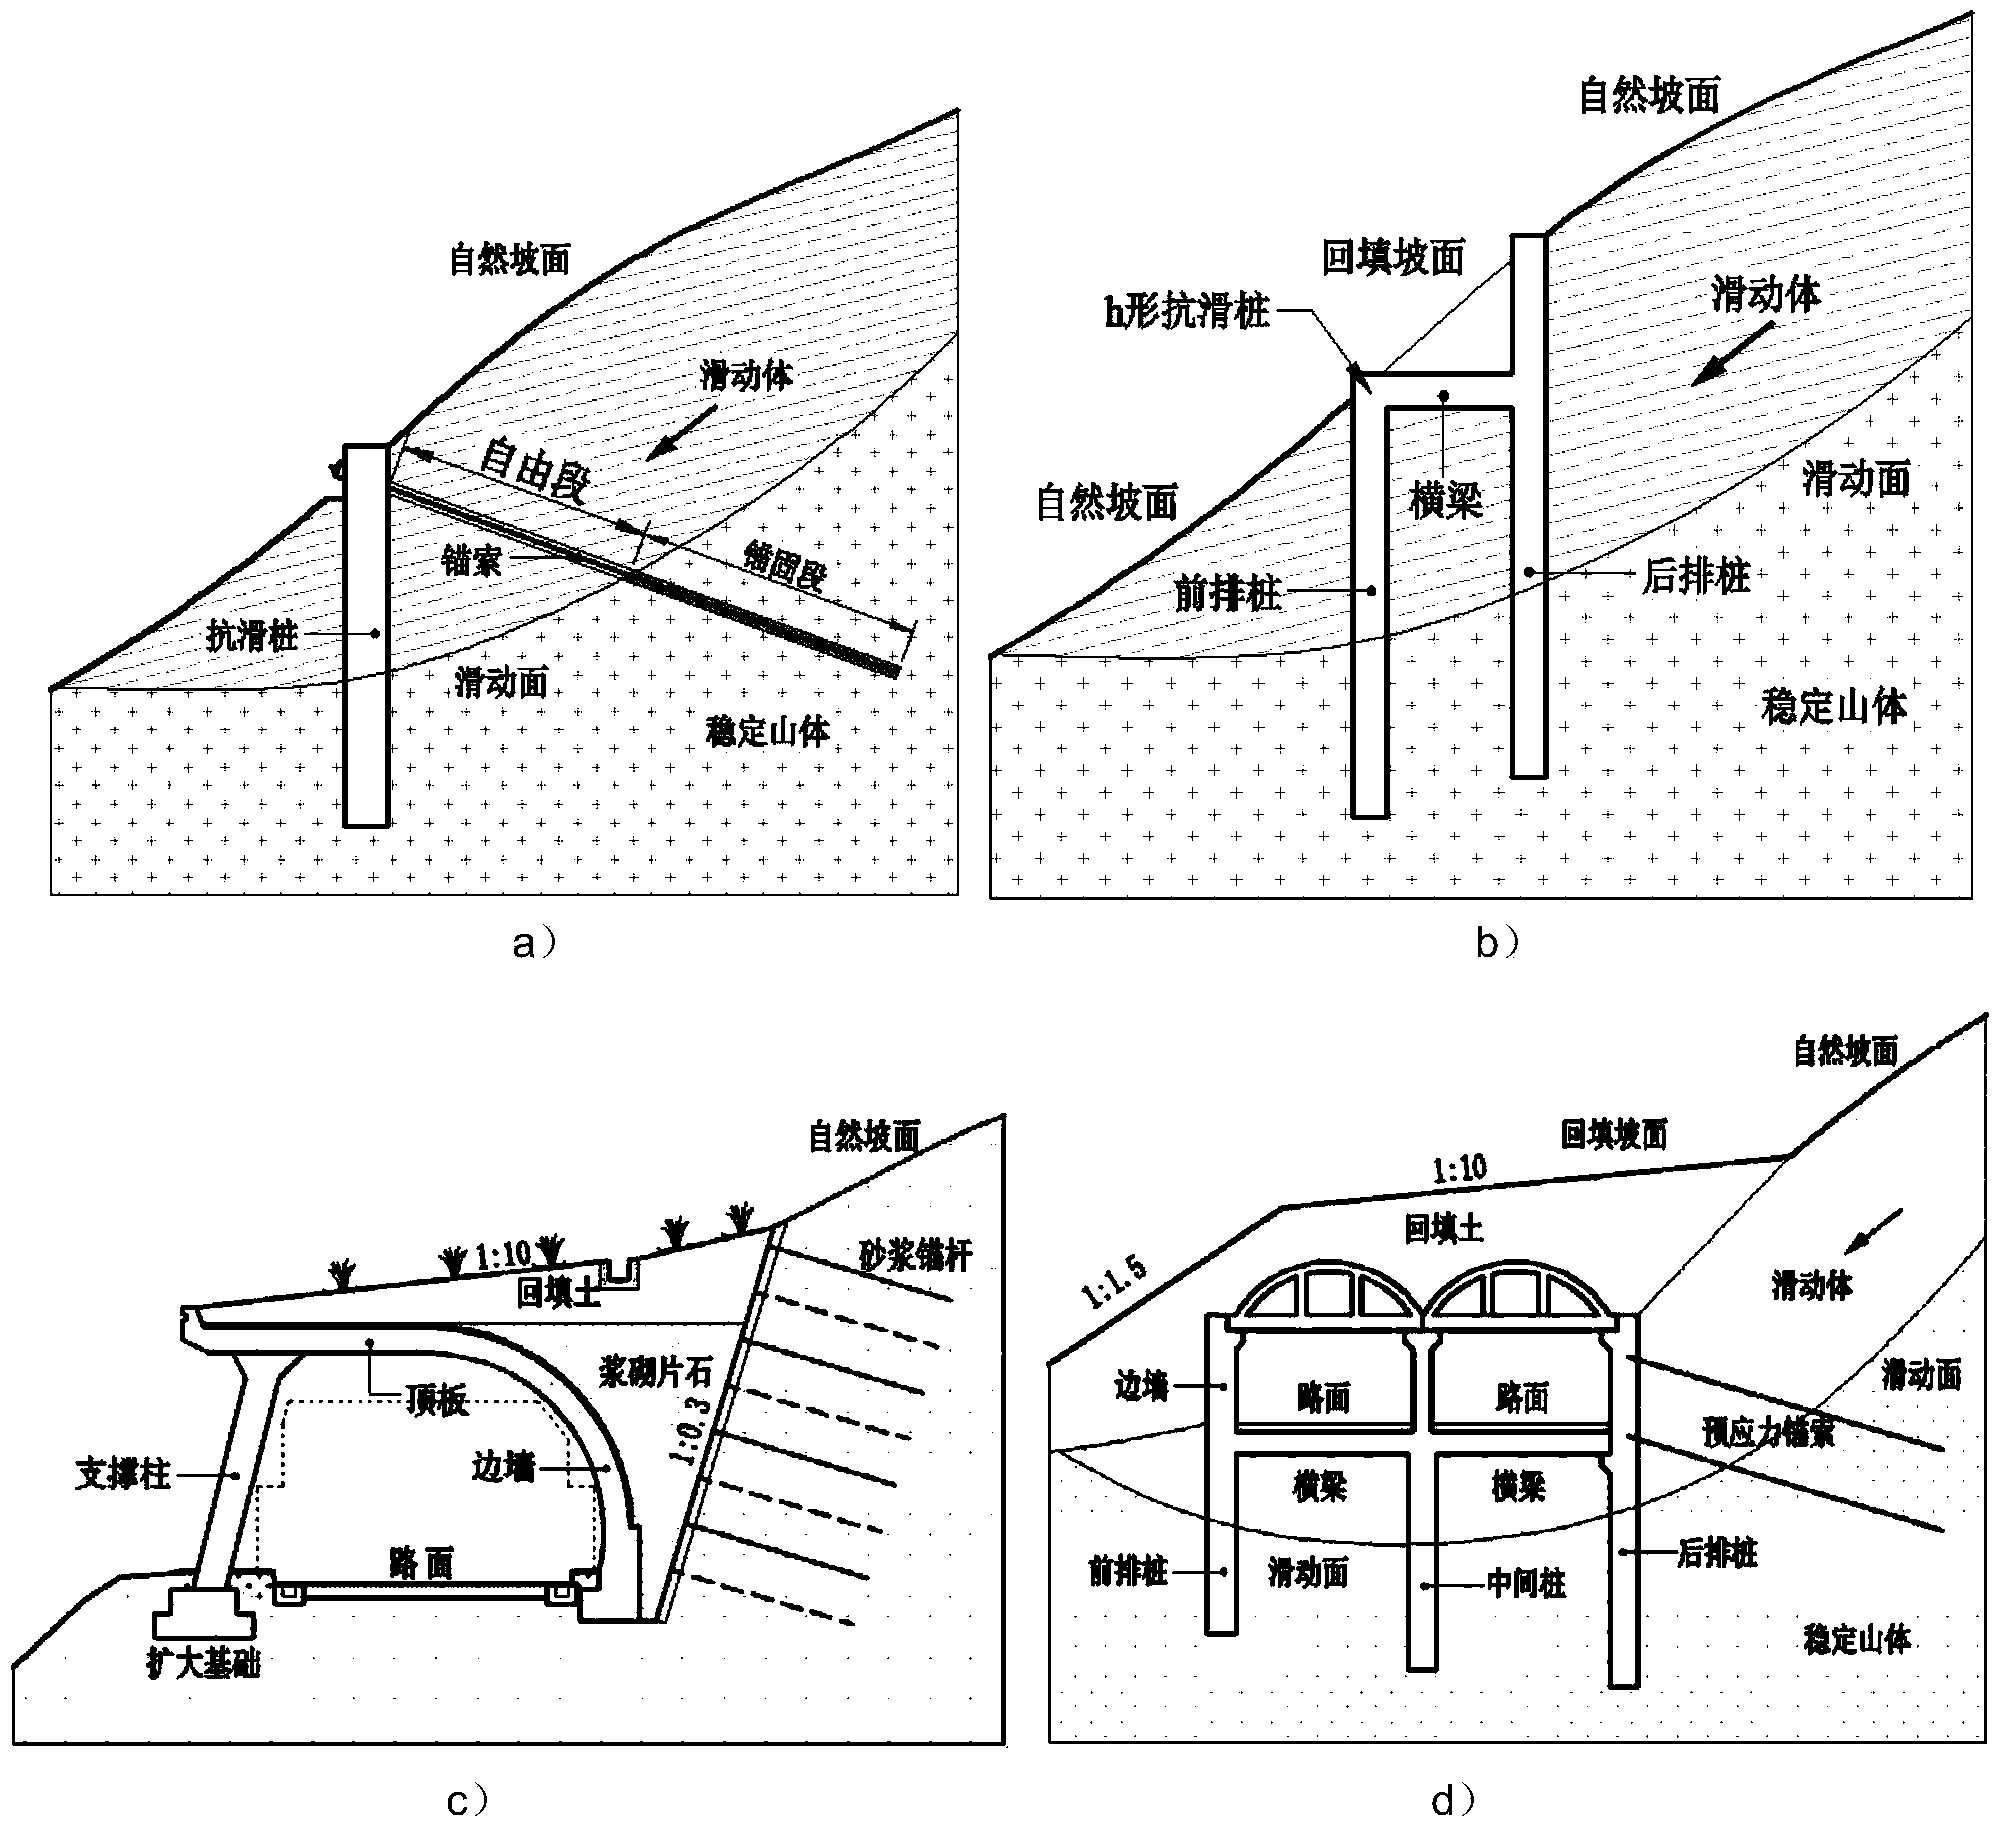 Pile-anchor-frame composite double-layer roadbed structure